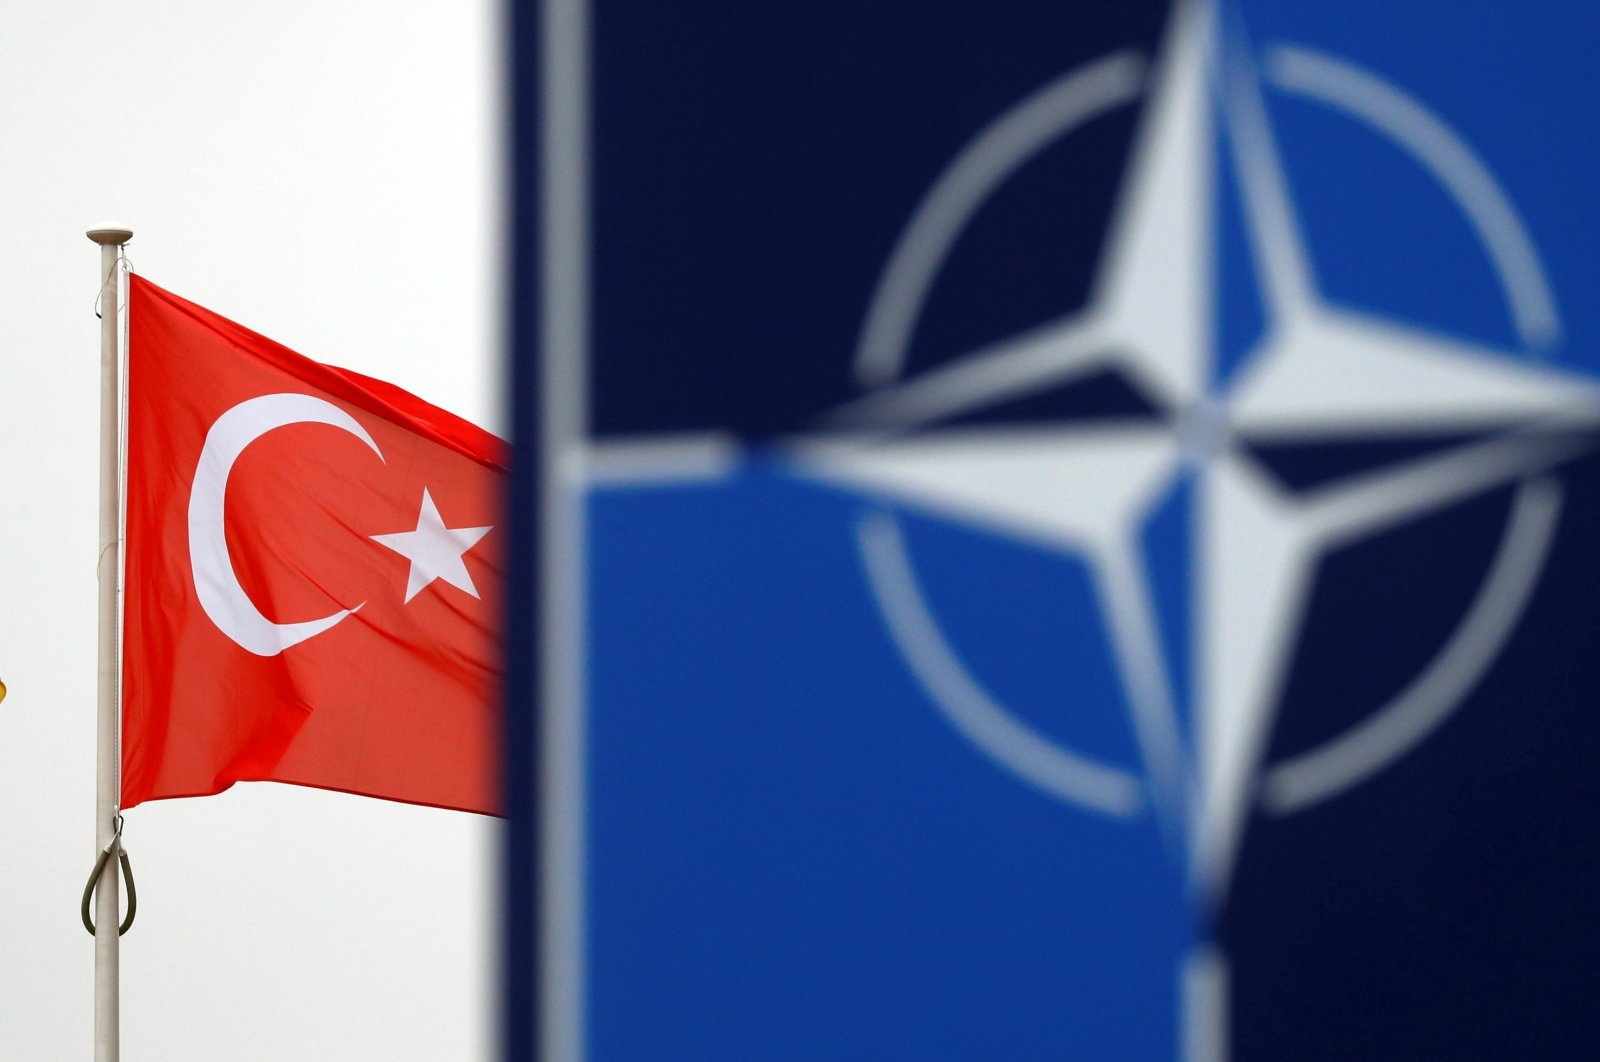 A Turkish flag flies next to the NATO logo at the alliance's headquarters in Brussels, Belgium, Nov. 26, 2019. (Reuters Photo)